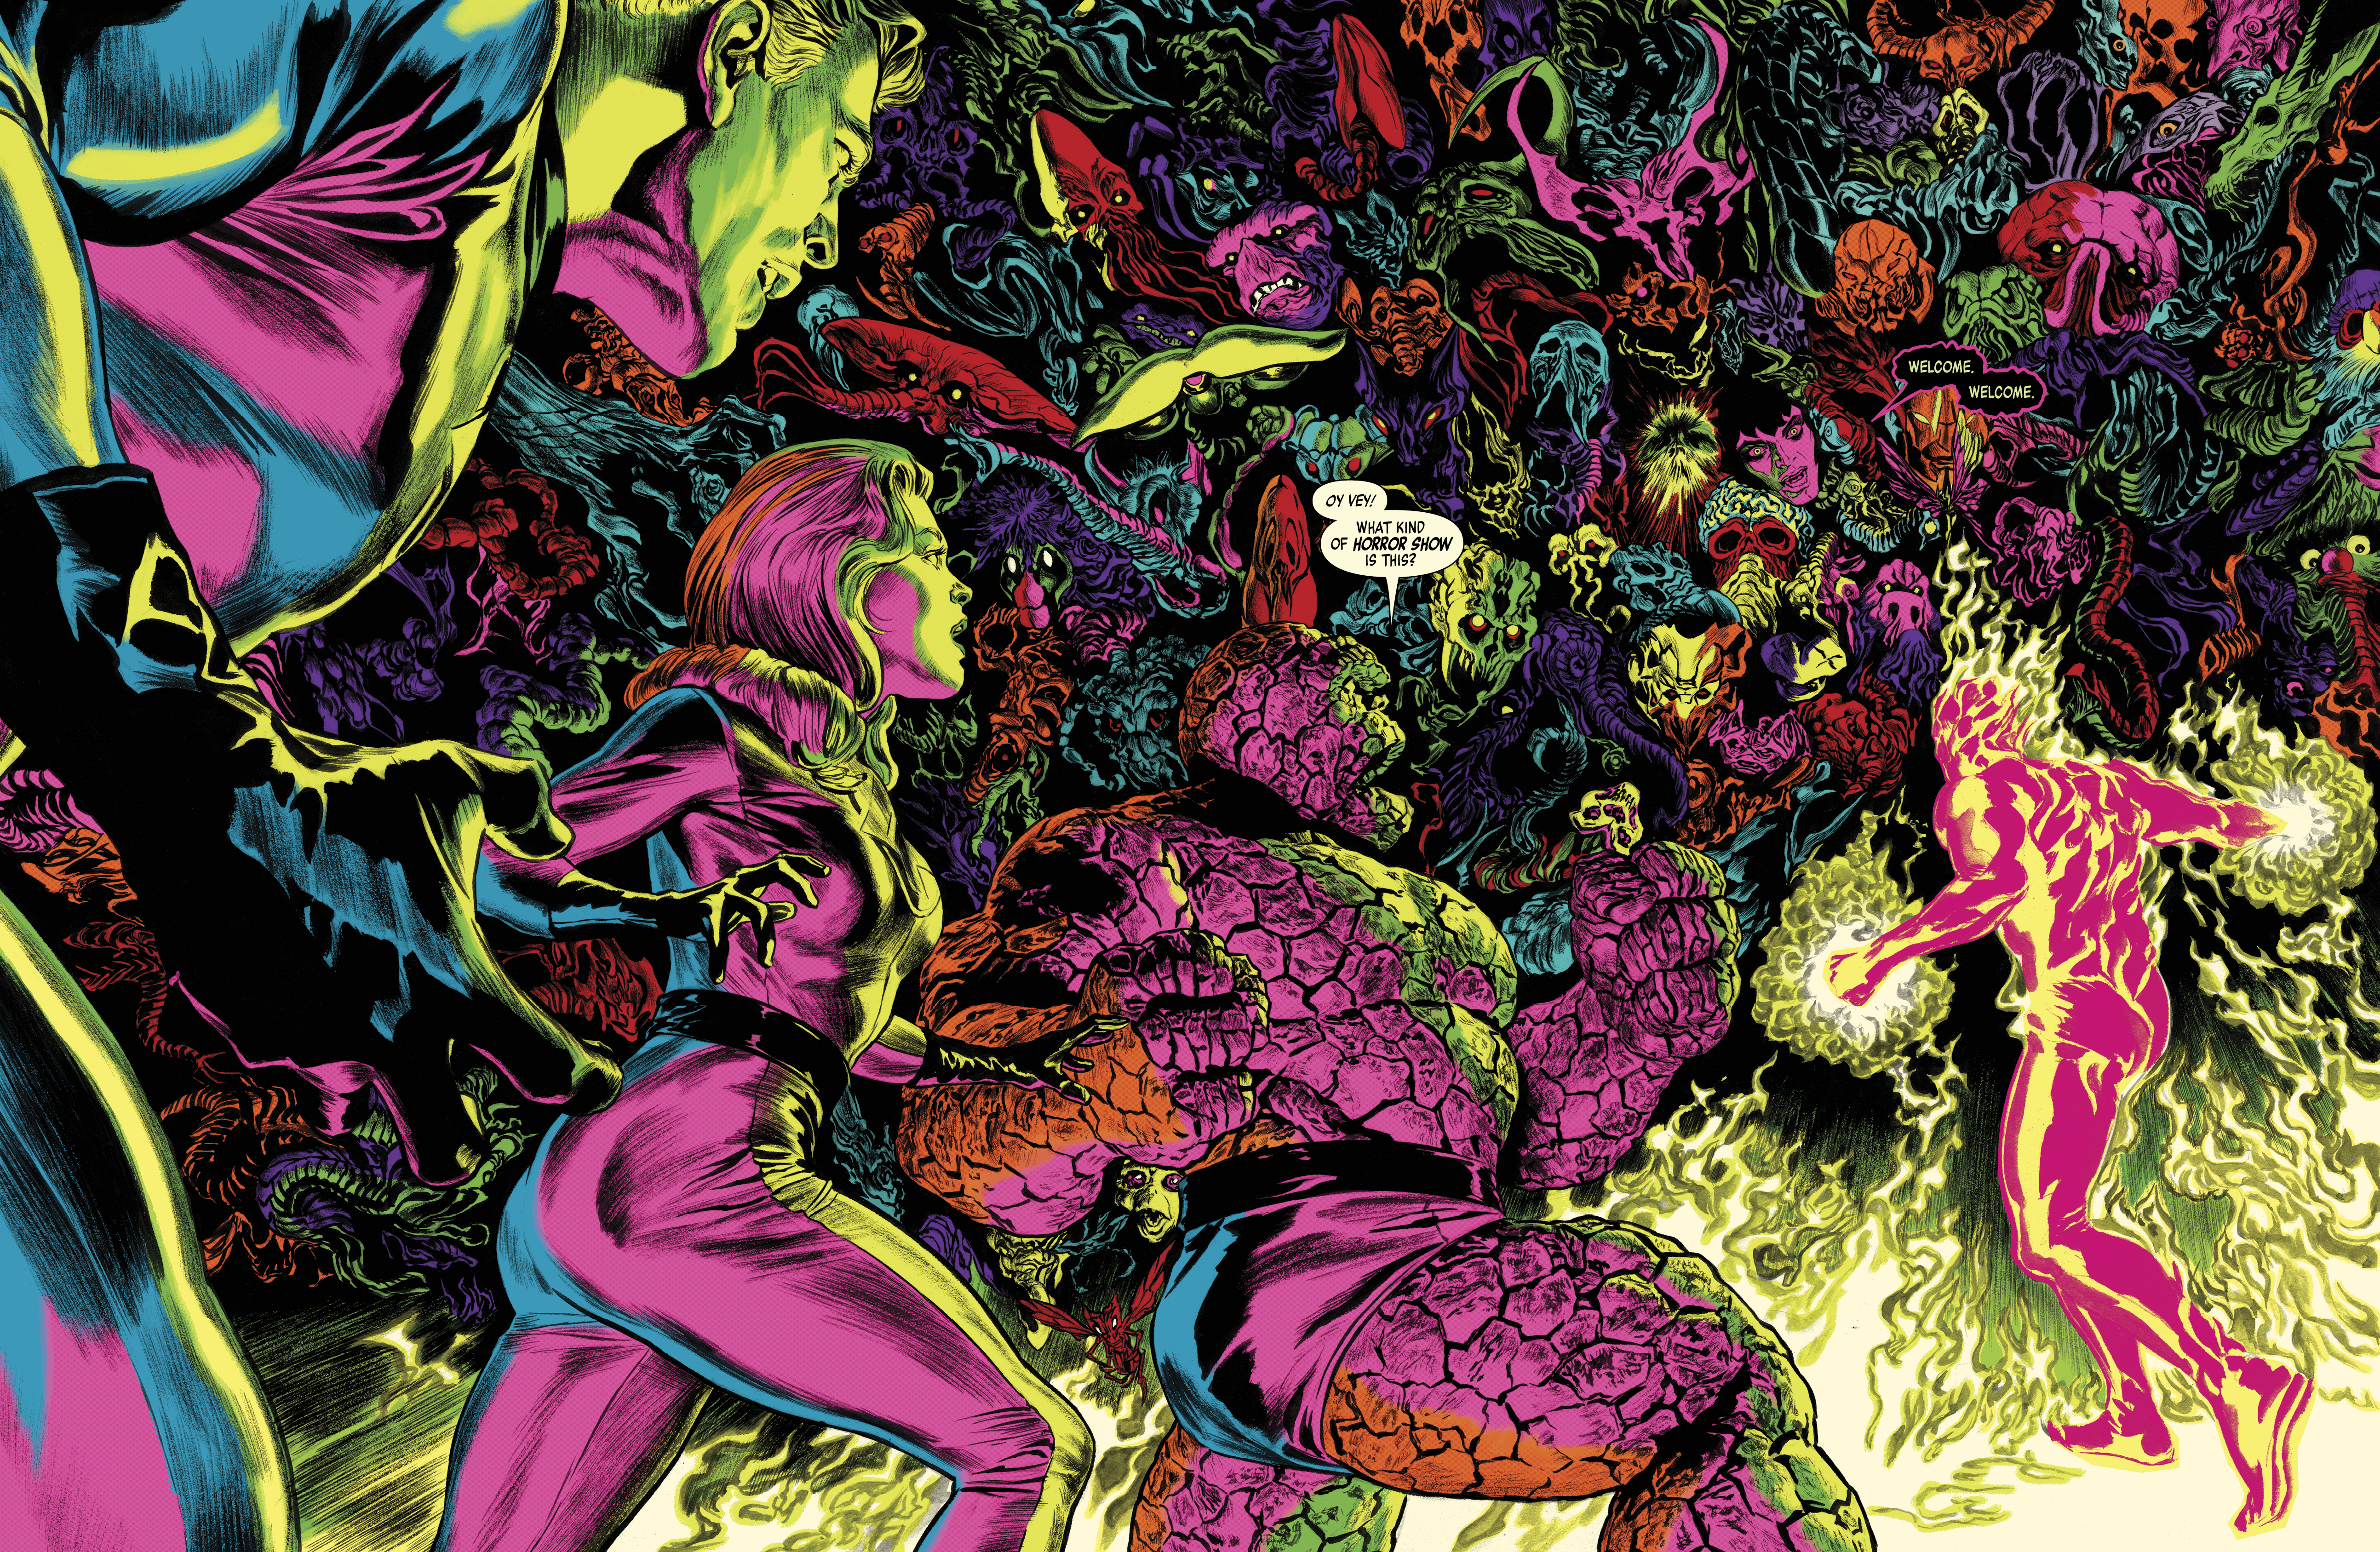 The Fantastic Four enter a chamber full of monsters of every color